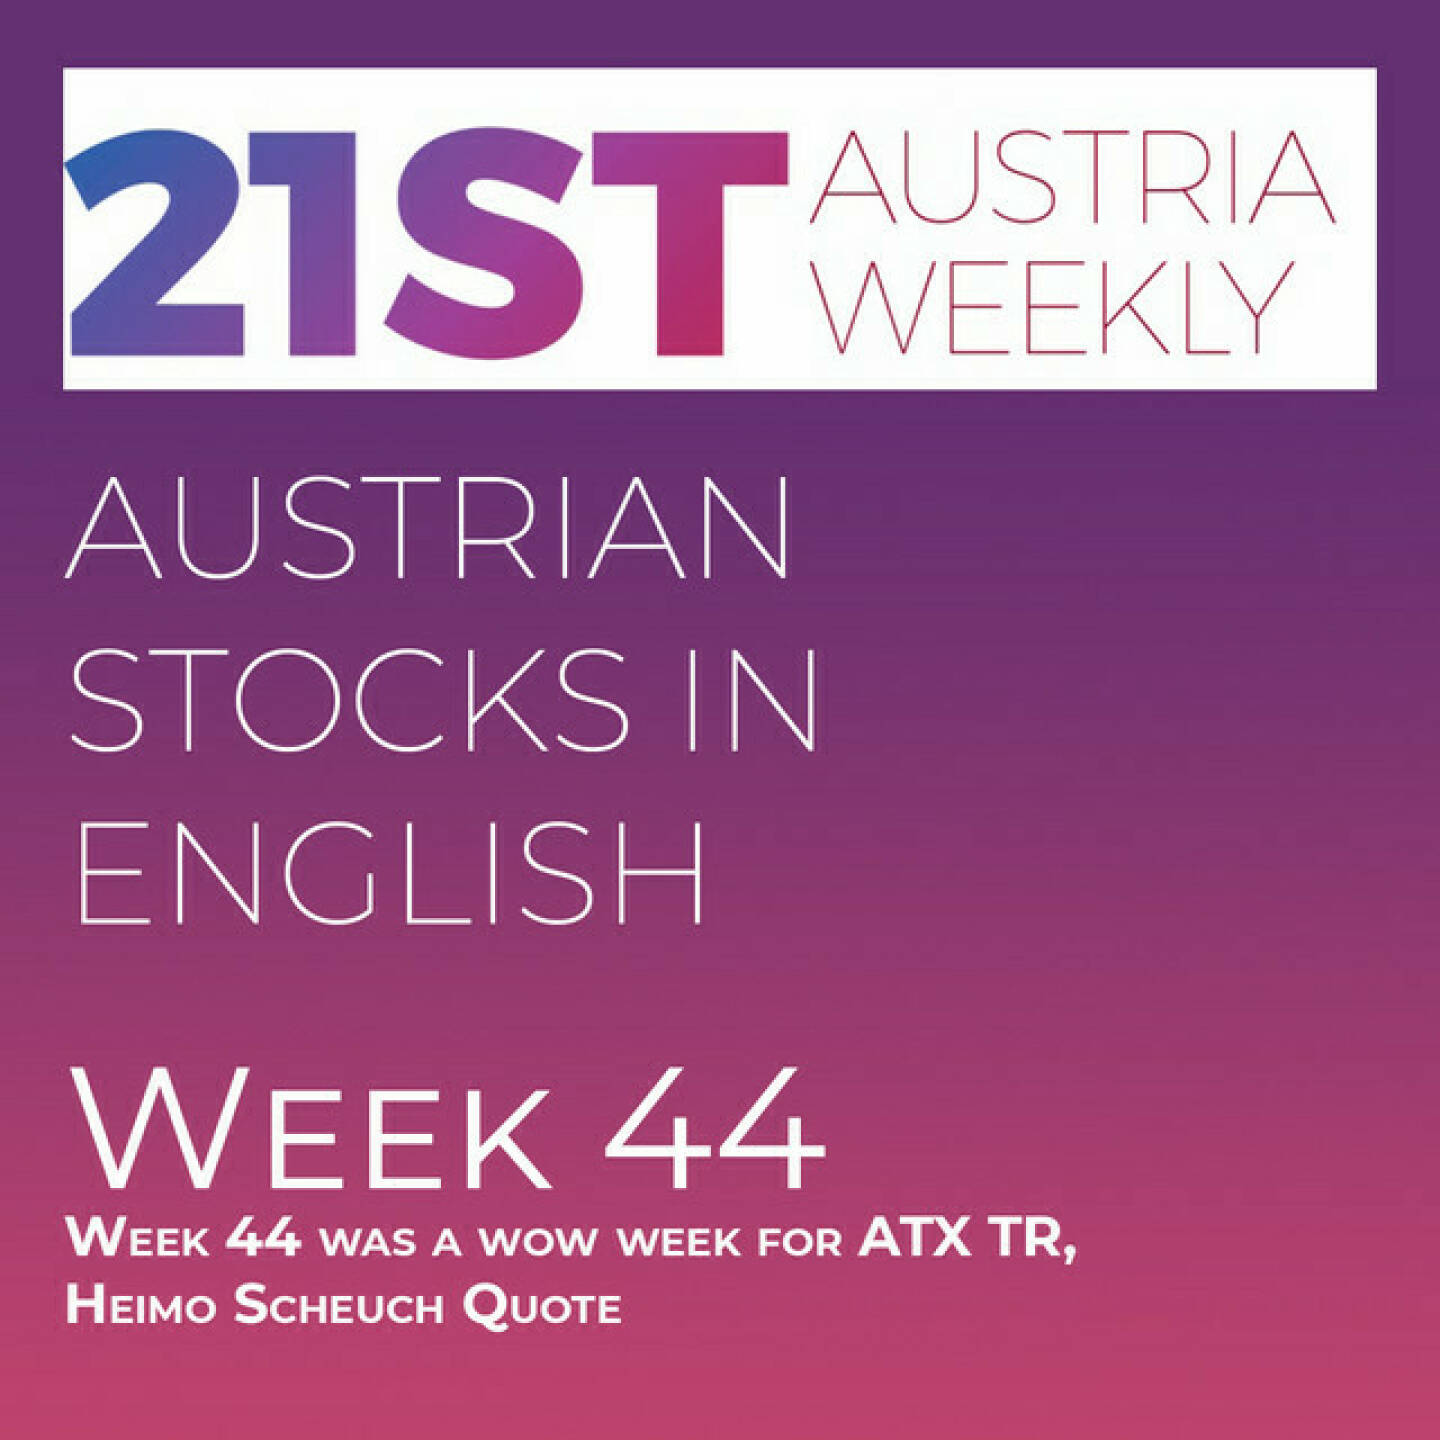 https://open.spotify.com/episode/2lHxQZLqkcV25bDPp7YhfH
Austrian Stocks in English: Week 44 was a wow week for ATX TR, Heimo Scheuch Quote - Welcome to &#34;Austrian Stocks in English - presented by Palfinger&#34;, the new and weekly english spoken Summary for the Austrian Stock Market, positioned every Sunday in the mostly german languaged Podcast &#34; Christian Drastil - Wiener Börse, Sport Musik und Mehr“ . <br/>Week 44 was another wow week for ATX TR, which went up 5.4 percent. On Friday ATX TR climbed nearly 300 Points, the seventh biggest gain in the History of the Index. Lenzing made 17 percent plus and the whole thing only on Friday. Uniqa is now 9 days in a row up and egalized a Bawag row with 9 days, the best series this year so far. Heimo Scheuch, CEO of Wienerberger, did a nice sidestep in his own podcast, which I will feature in the shownotes<br/>News came from CA Immo, OMV, Lenzing, ams Osram, Andritz (3), Immofinanz, Mayr-Melnhof, Verbund, AT&amp;S, RBI, Kontron, Pierer Mobility, Apeiron and Erste Group. And these news are spoken now by the absolutely smart Alison. <br/>Heimo Scheuch: https://audio-cd.at/page/playlist/2676/heimo_scheuch_podcast_episode_#21:_ceo_ask_me_anything__part_2-3_-_culture_and_diversity_at_wienerberger<br/>Please rate my Podcast on Apple Podcasts (or Spotify): https://podcasts.apple.com/at/podcast/christian-drastil-wiener-borse-sport-musik-und-mehr-my-life/id1484919130 .